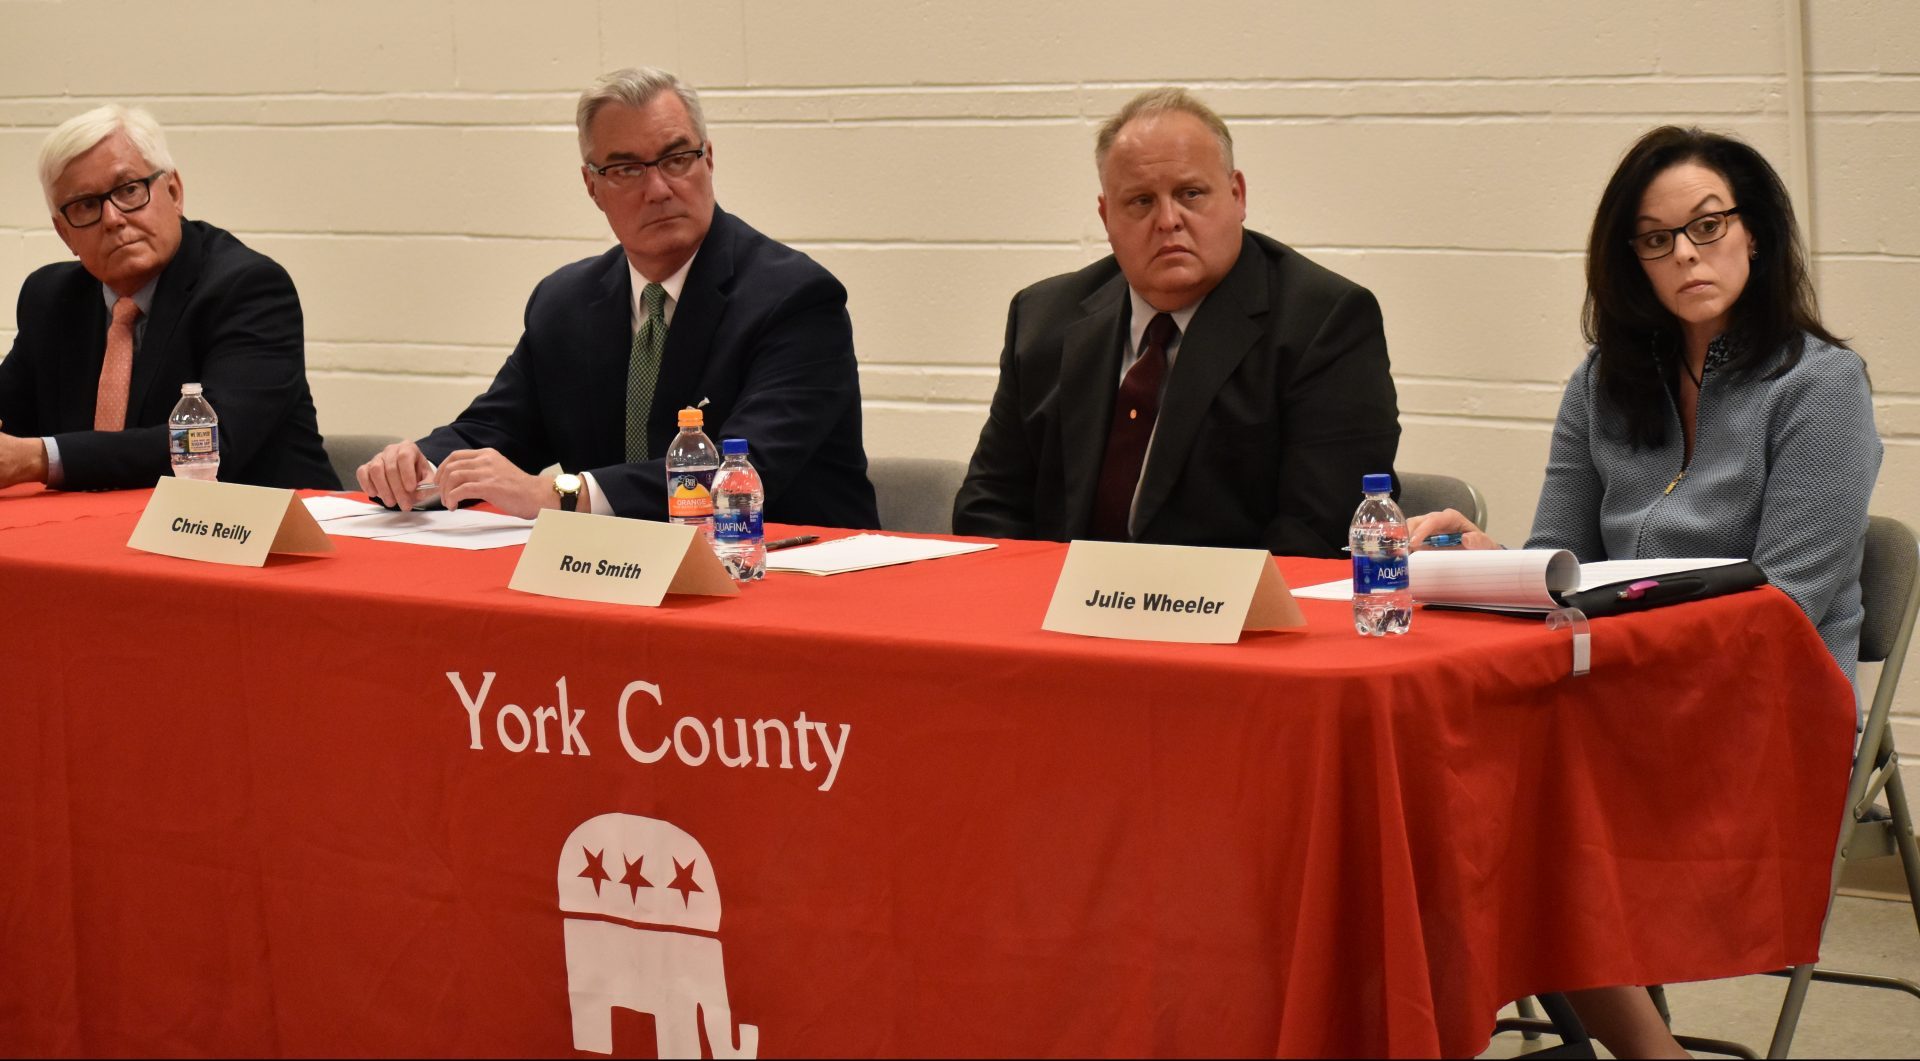 Four Republican candidates for York County commissioner participated in a debate on April 29, 2019. They are, from left to right, Steve Chronister, Chris Reilly, Ron Smith and Julie Wheeler.